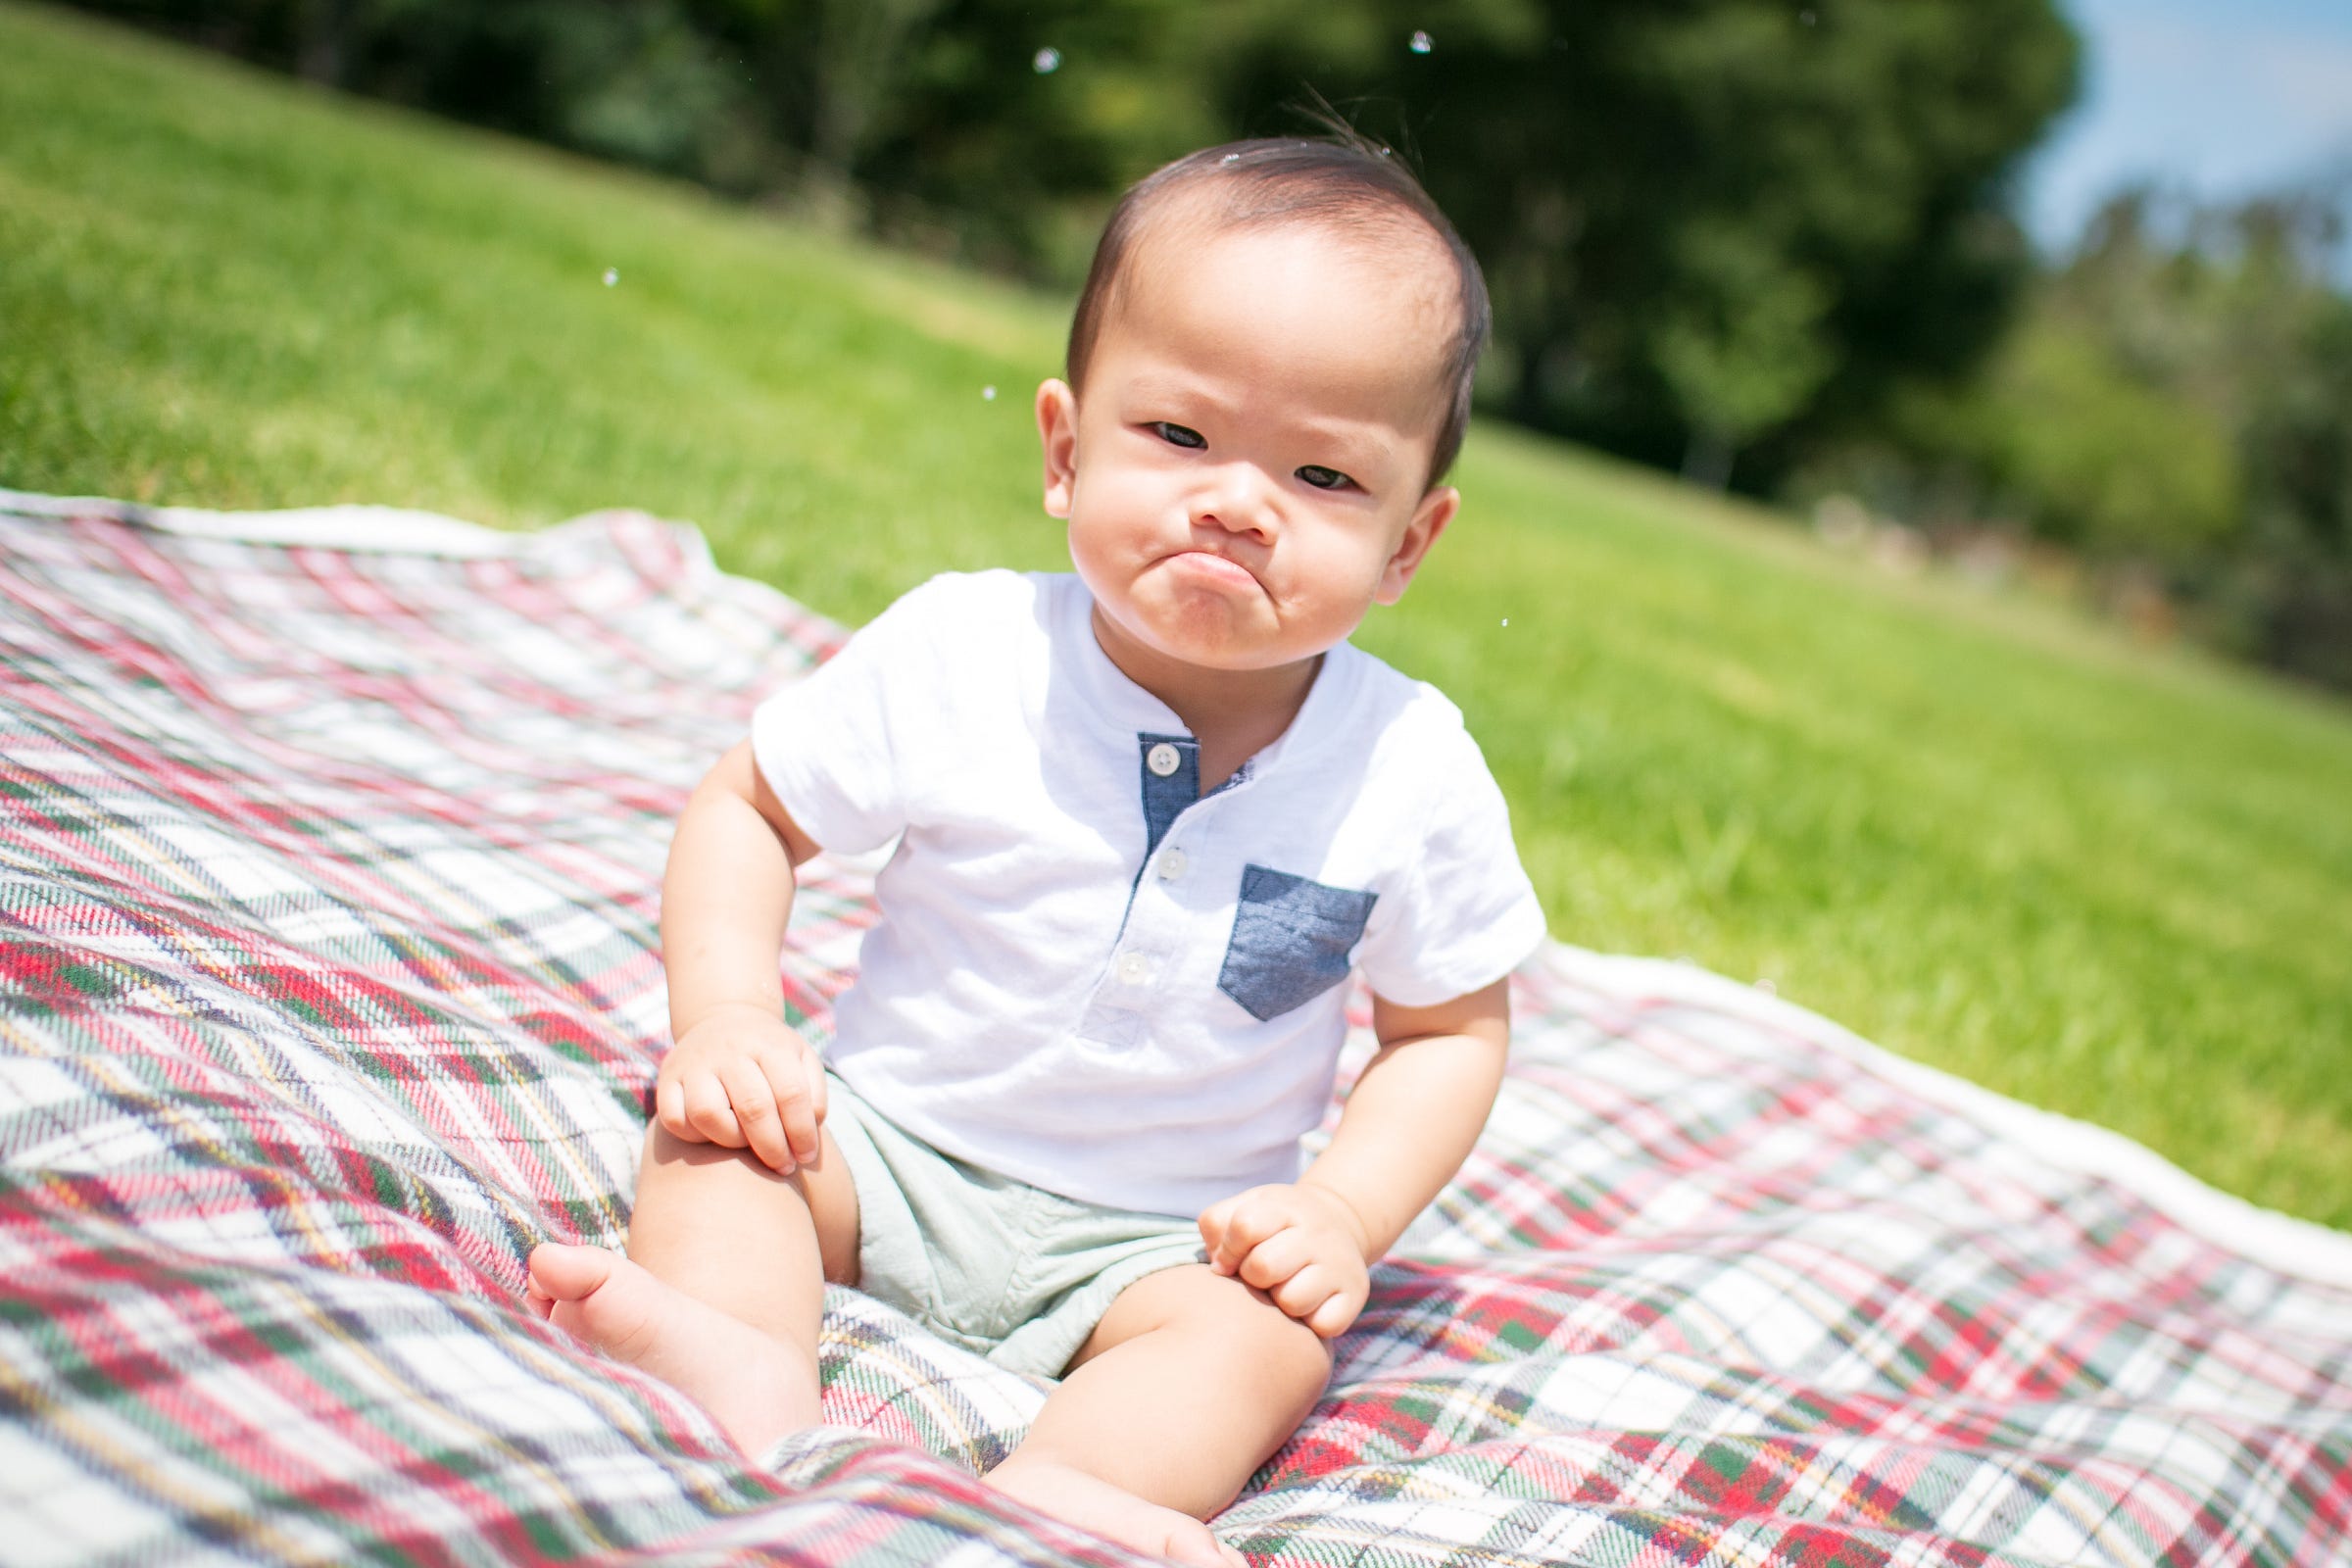 a baby with downturned lips sitting on a plaid blanket on grass